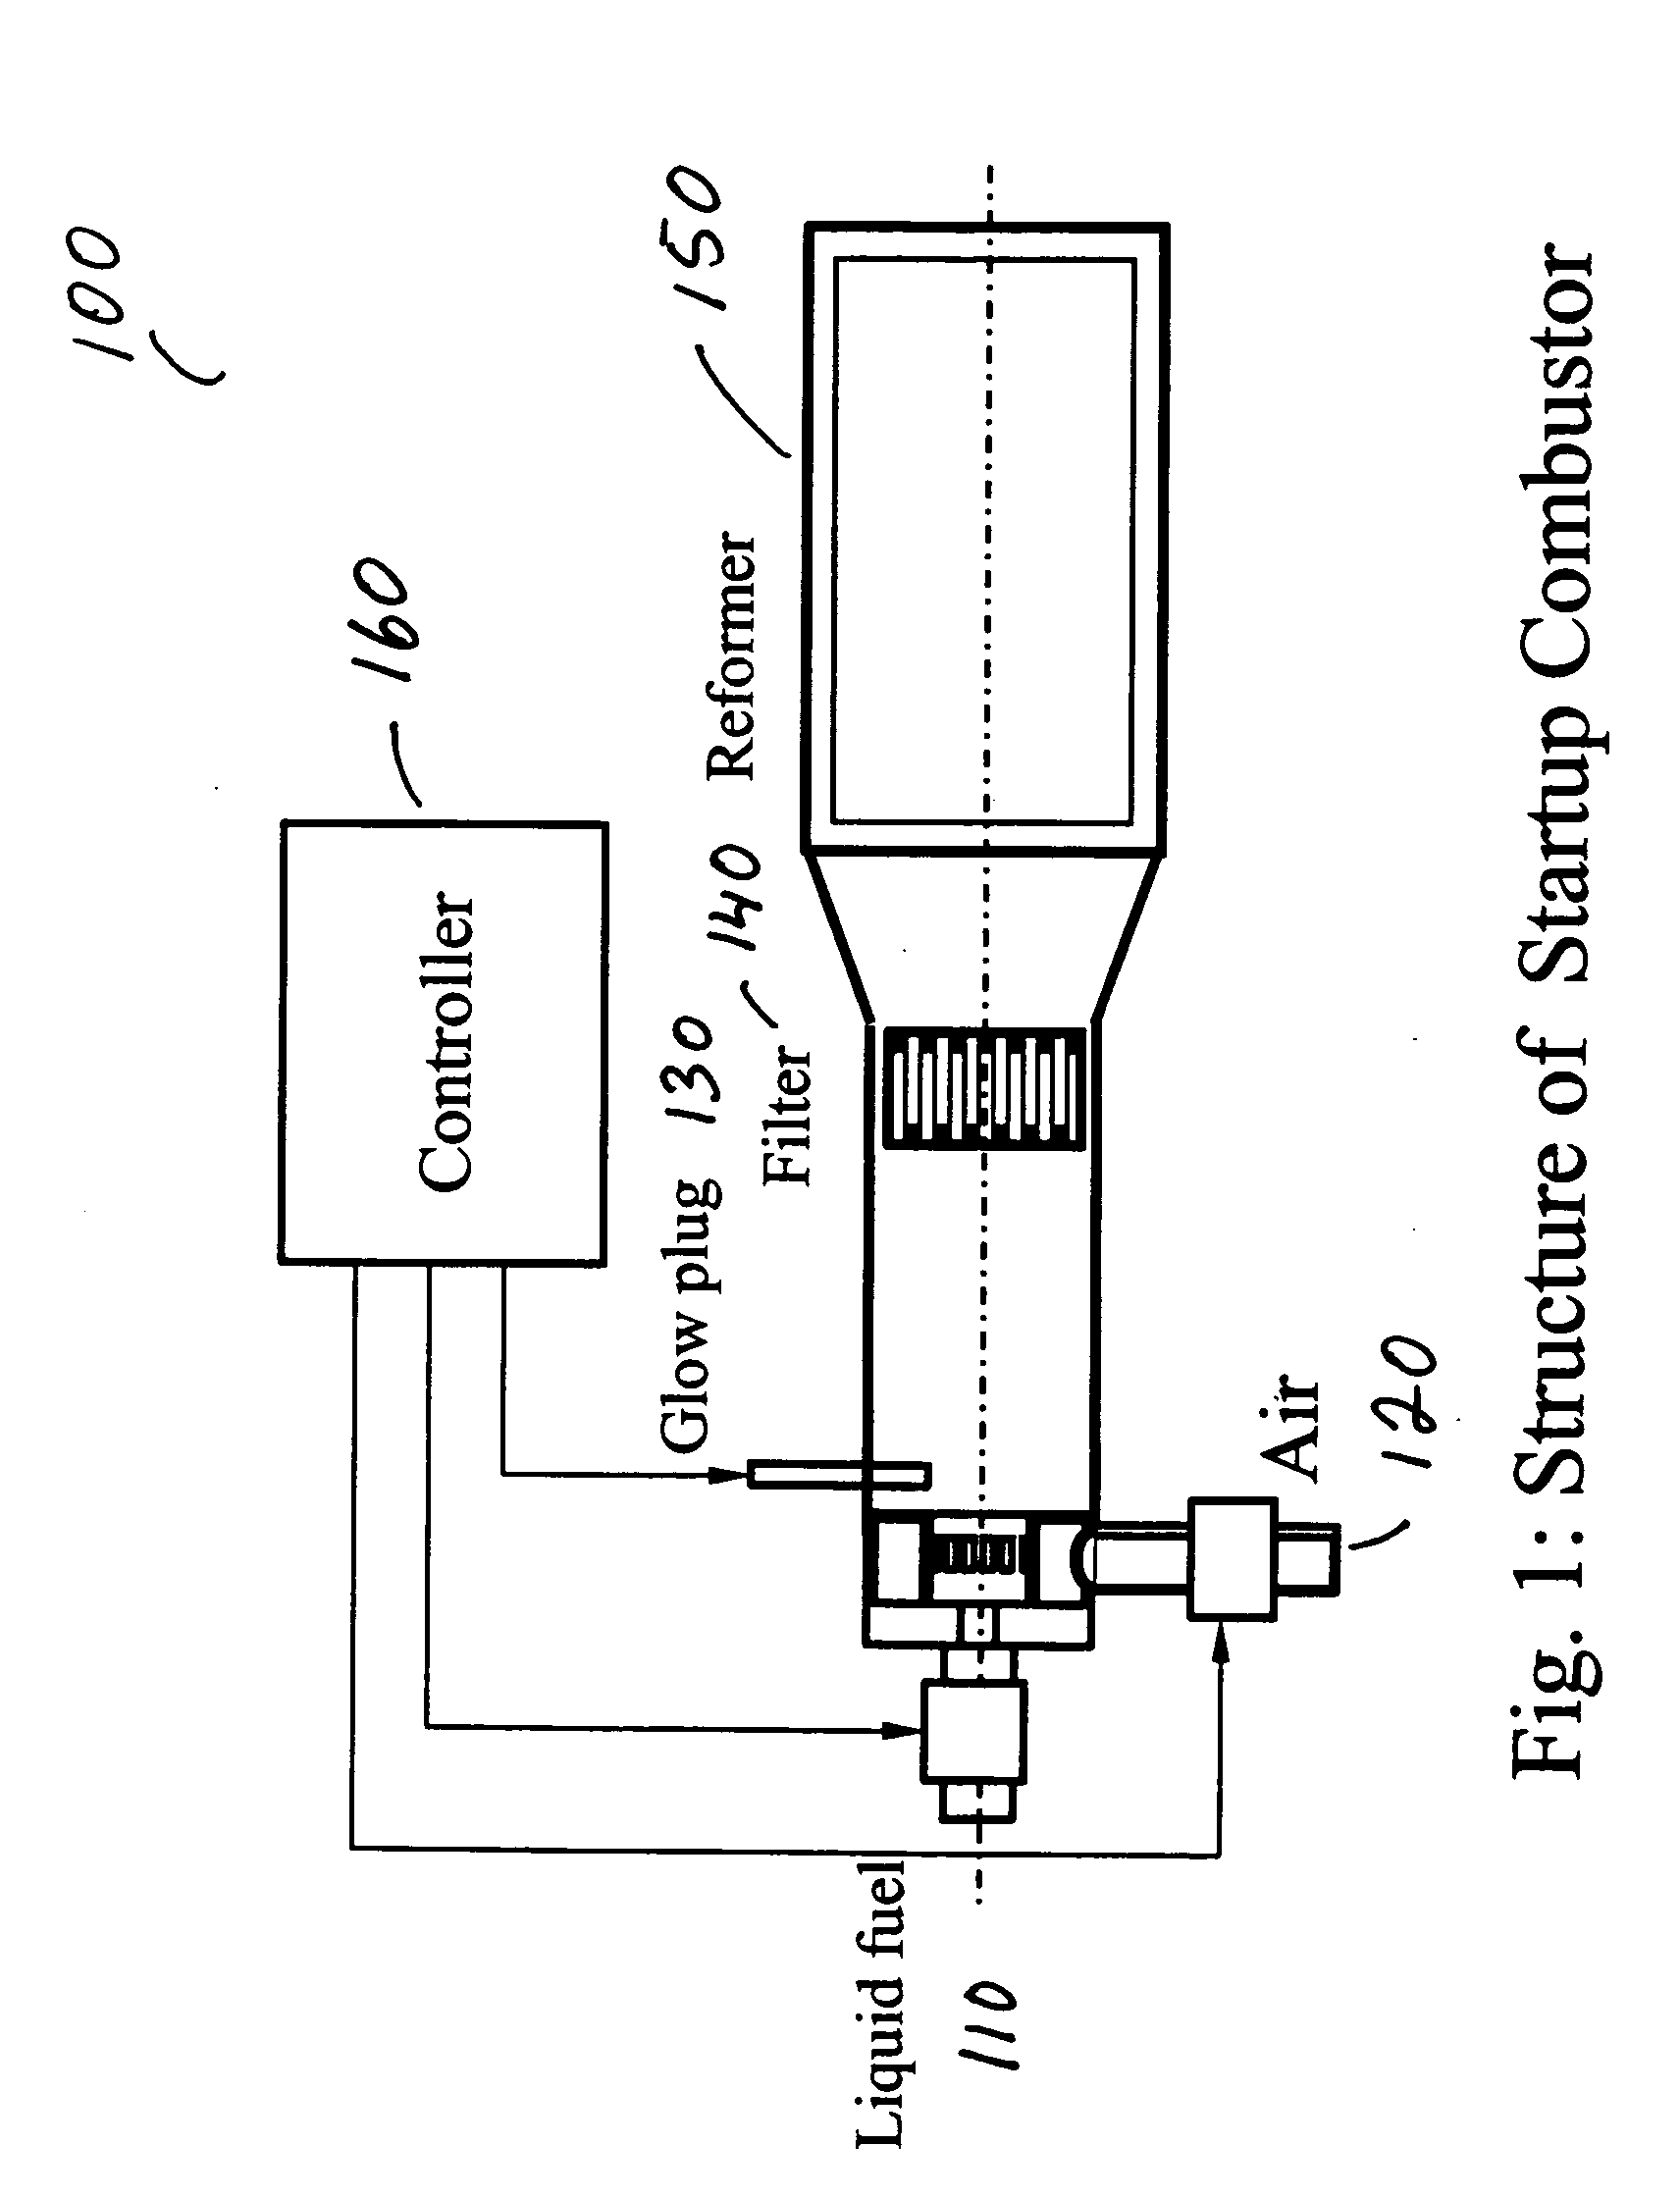 Startup combustor for a fuel cell